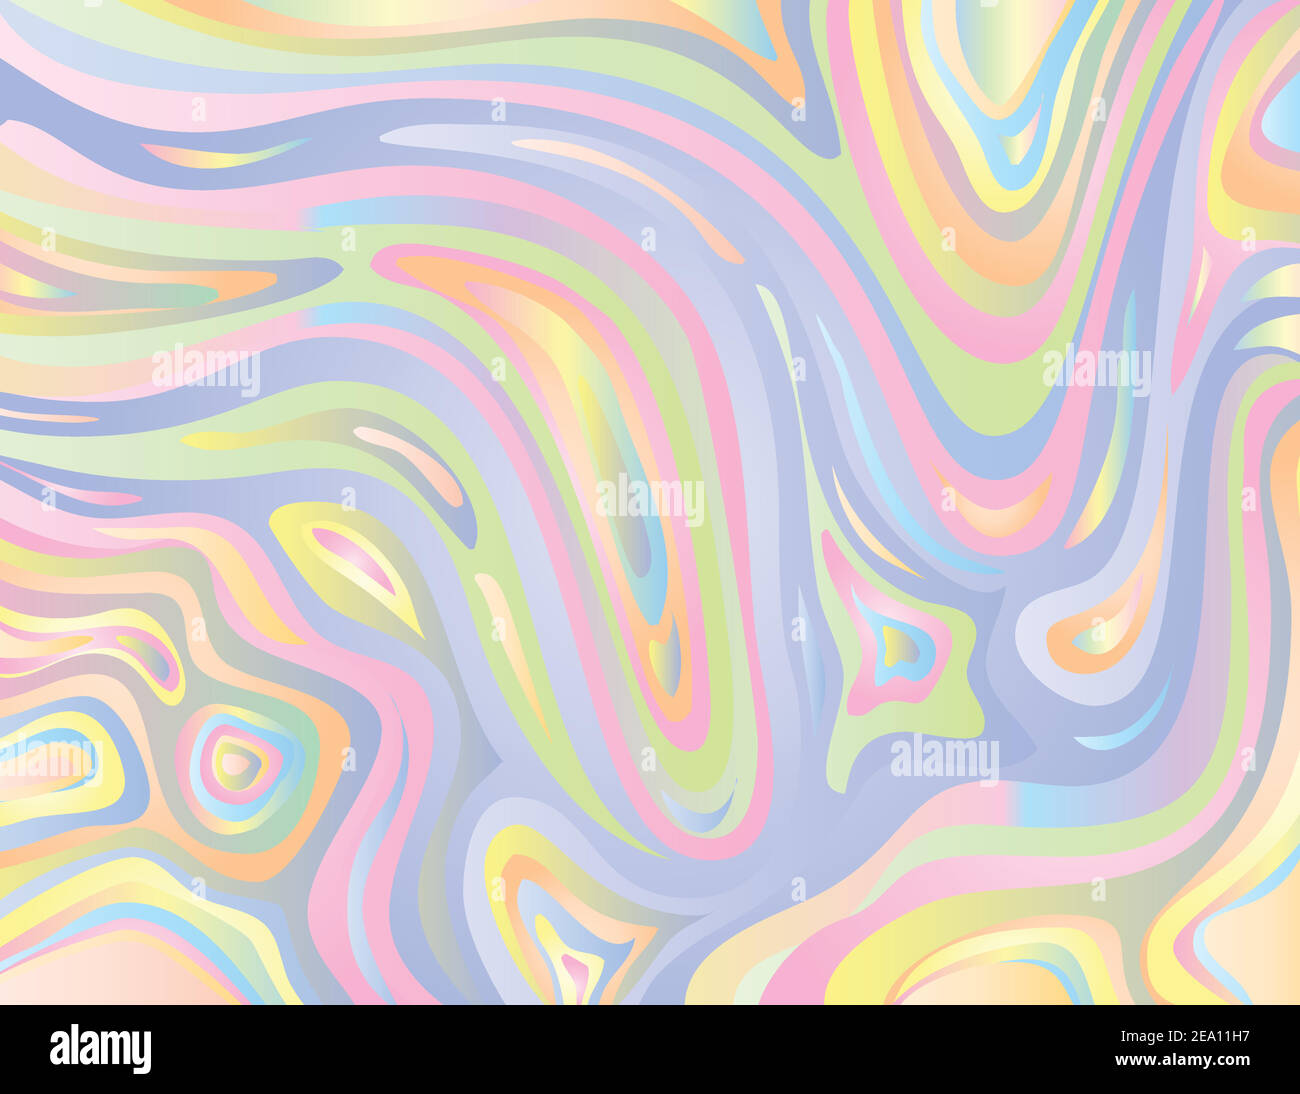 Digital marbling or inkscape illustration of an abstract swirling psychedelic, liquid marble and simulated marbling the Suminagashi Kintsugi marbled e Stock Vector